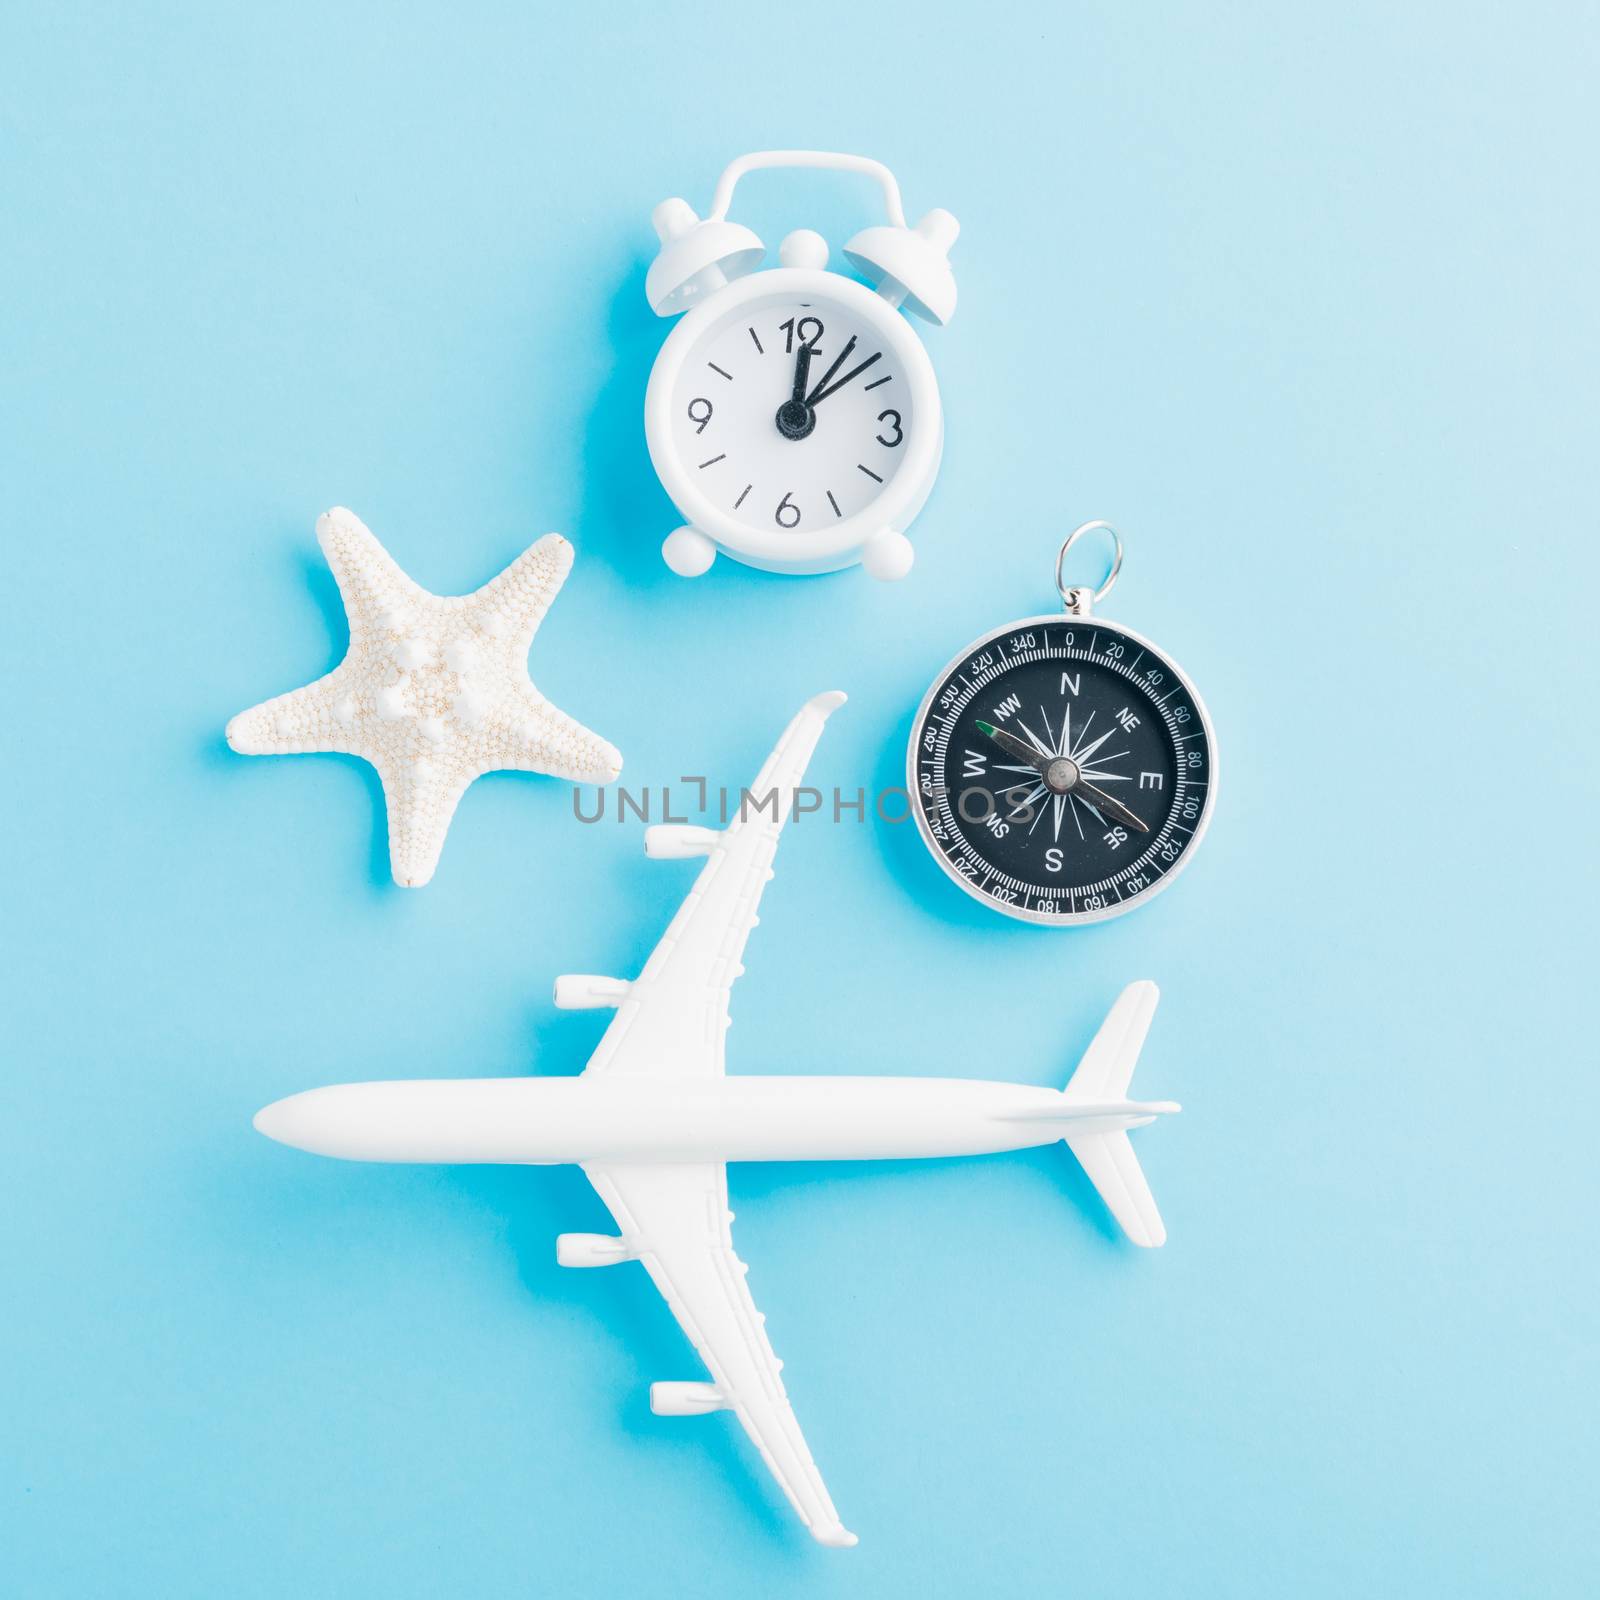 World Tourism Day, Top view flat lay of minimal toy model plane, airplane, starfish, alarm clock and compass, studio shot isolated on a blue background, accessory flight holiday concept